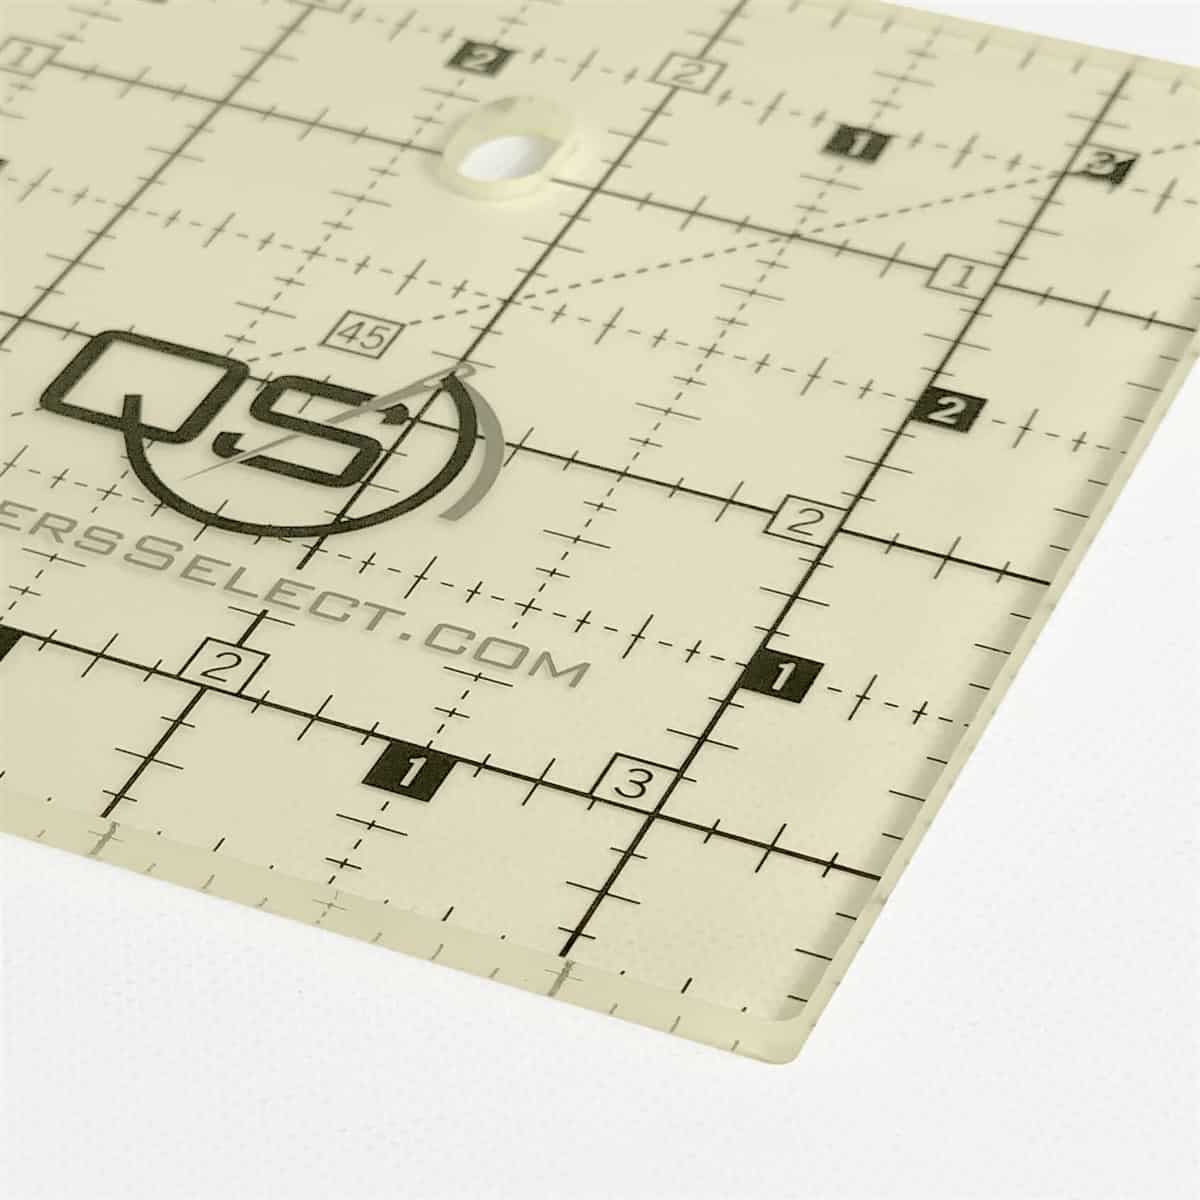 Select 3.5x3.5 Non-Slip Ruler QS-RUL3.5 – The Sewing Studio Fabric  Superstore